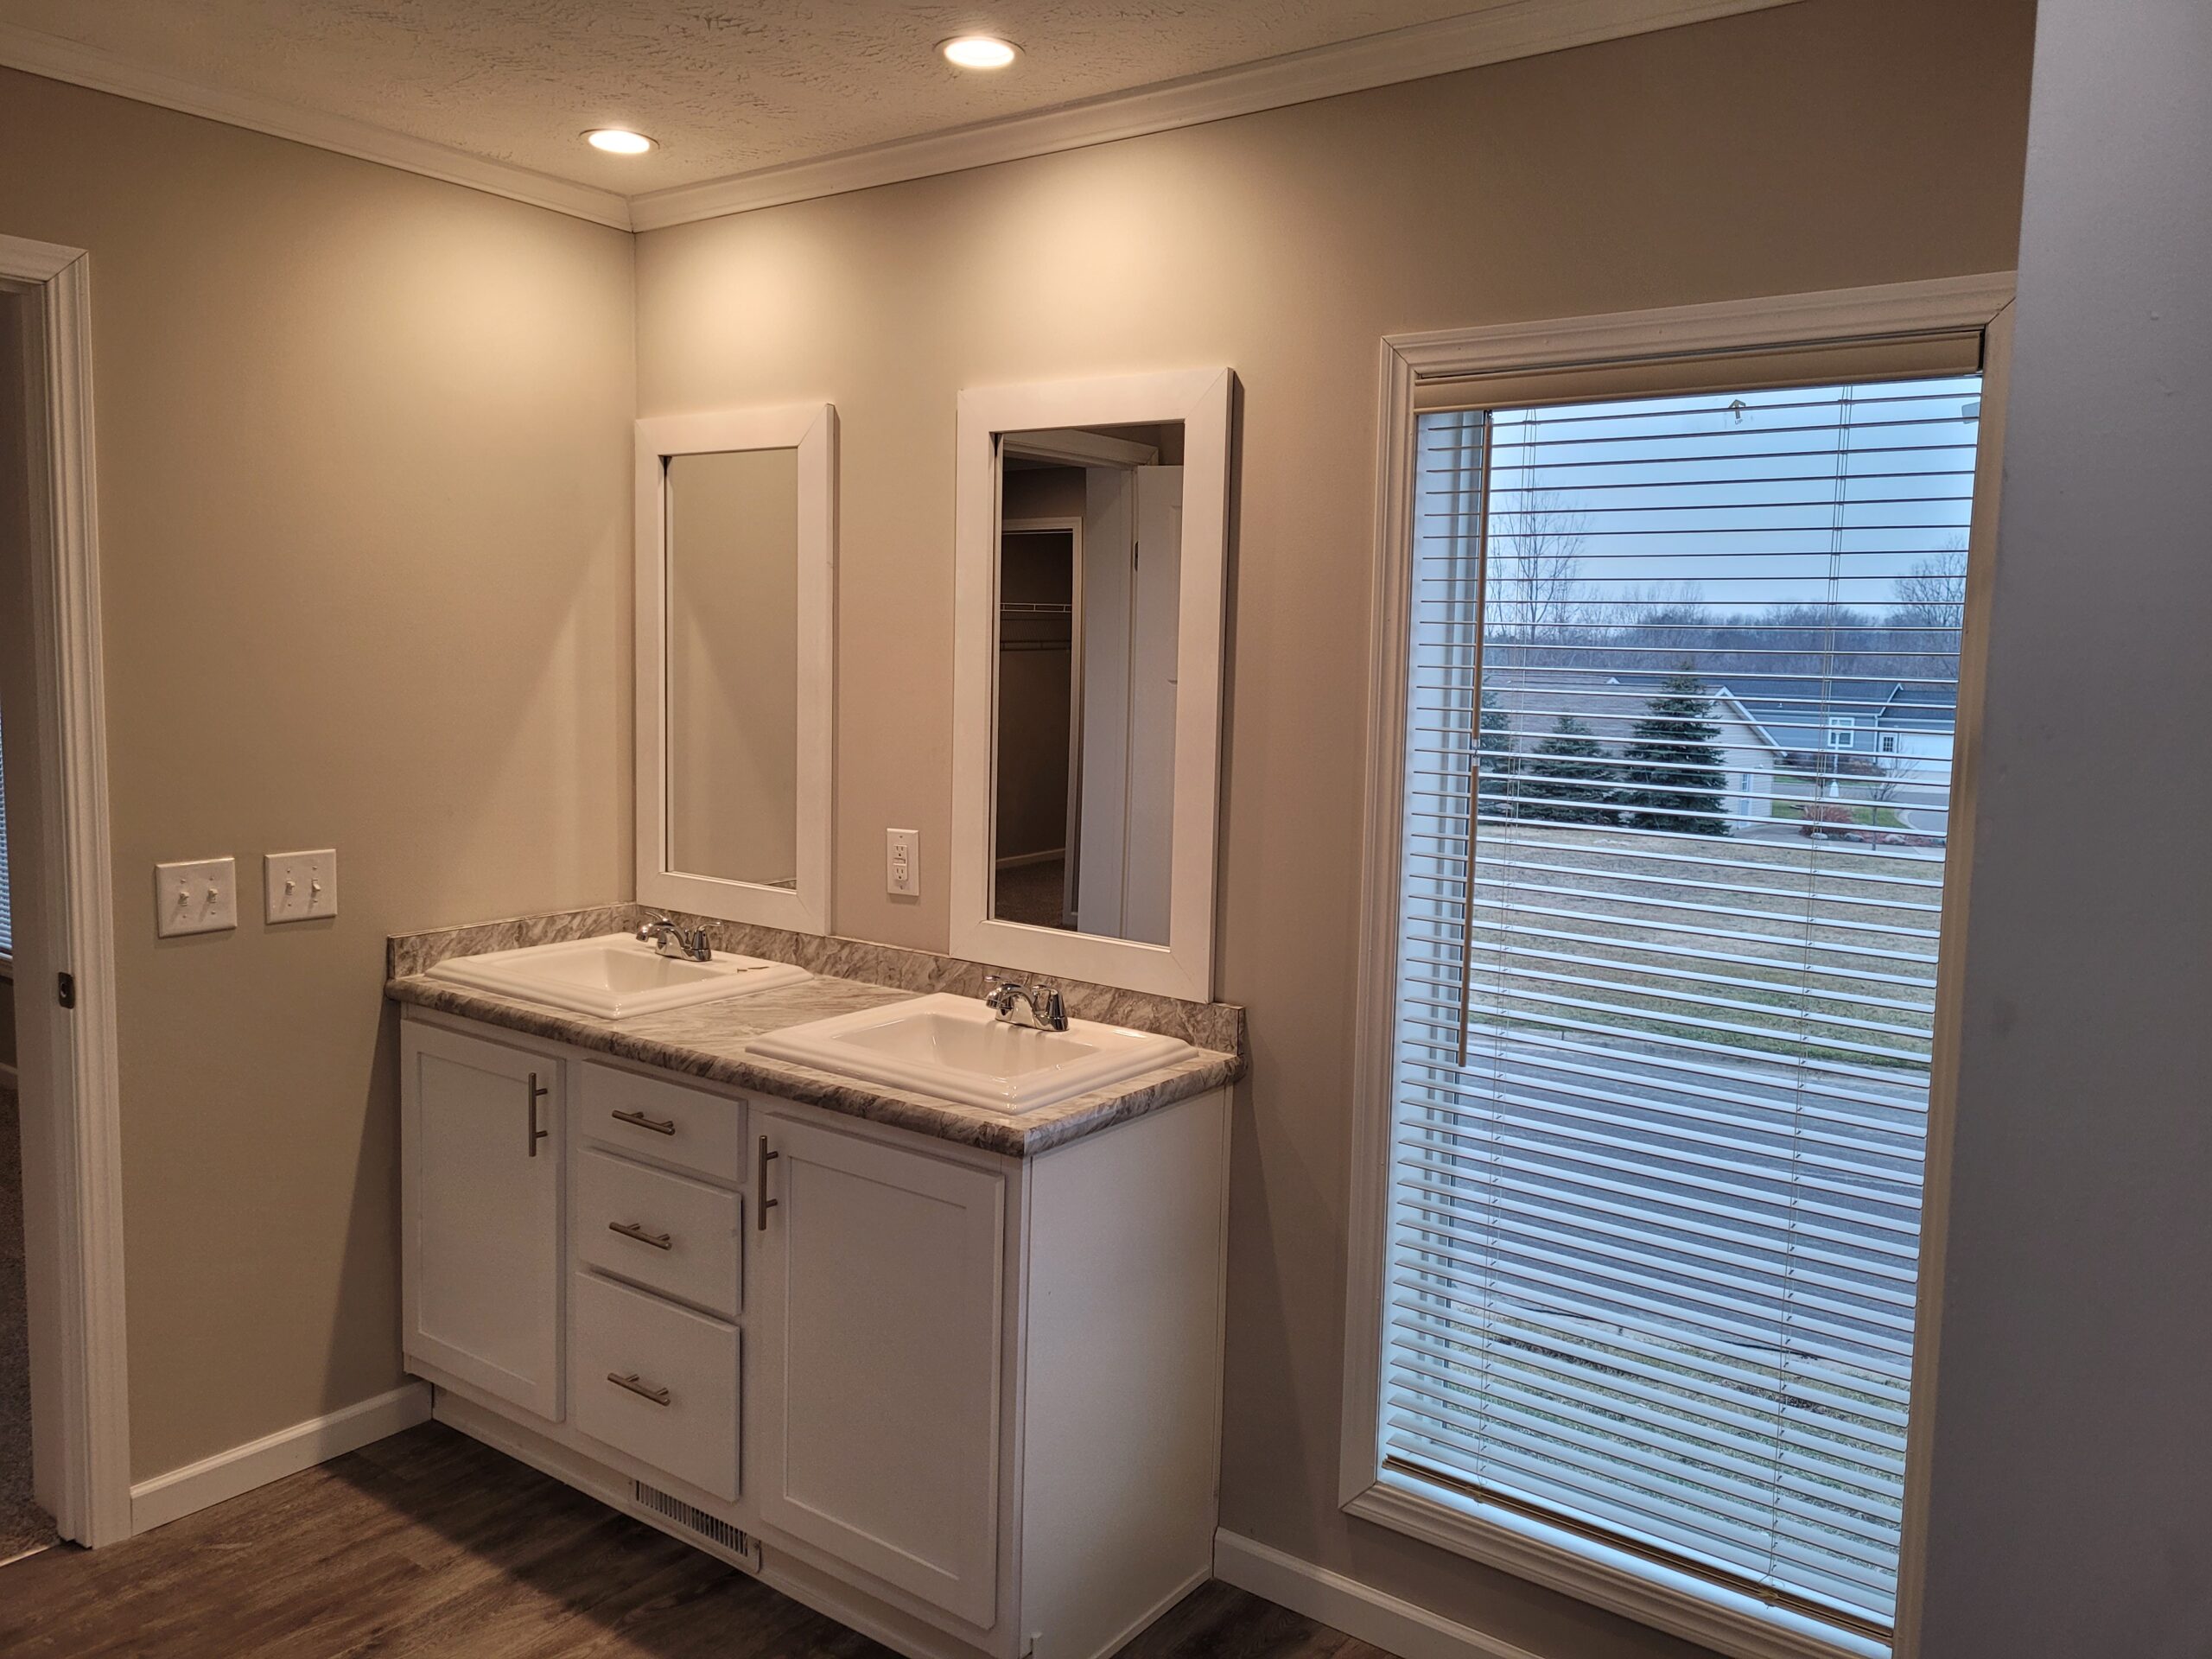 NEW HOME – NEW AMENITIES